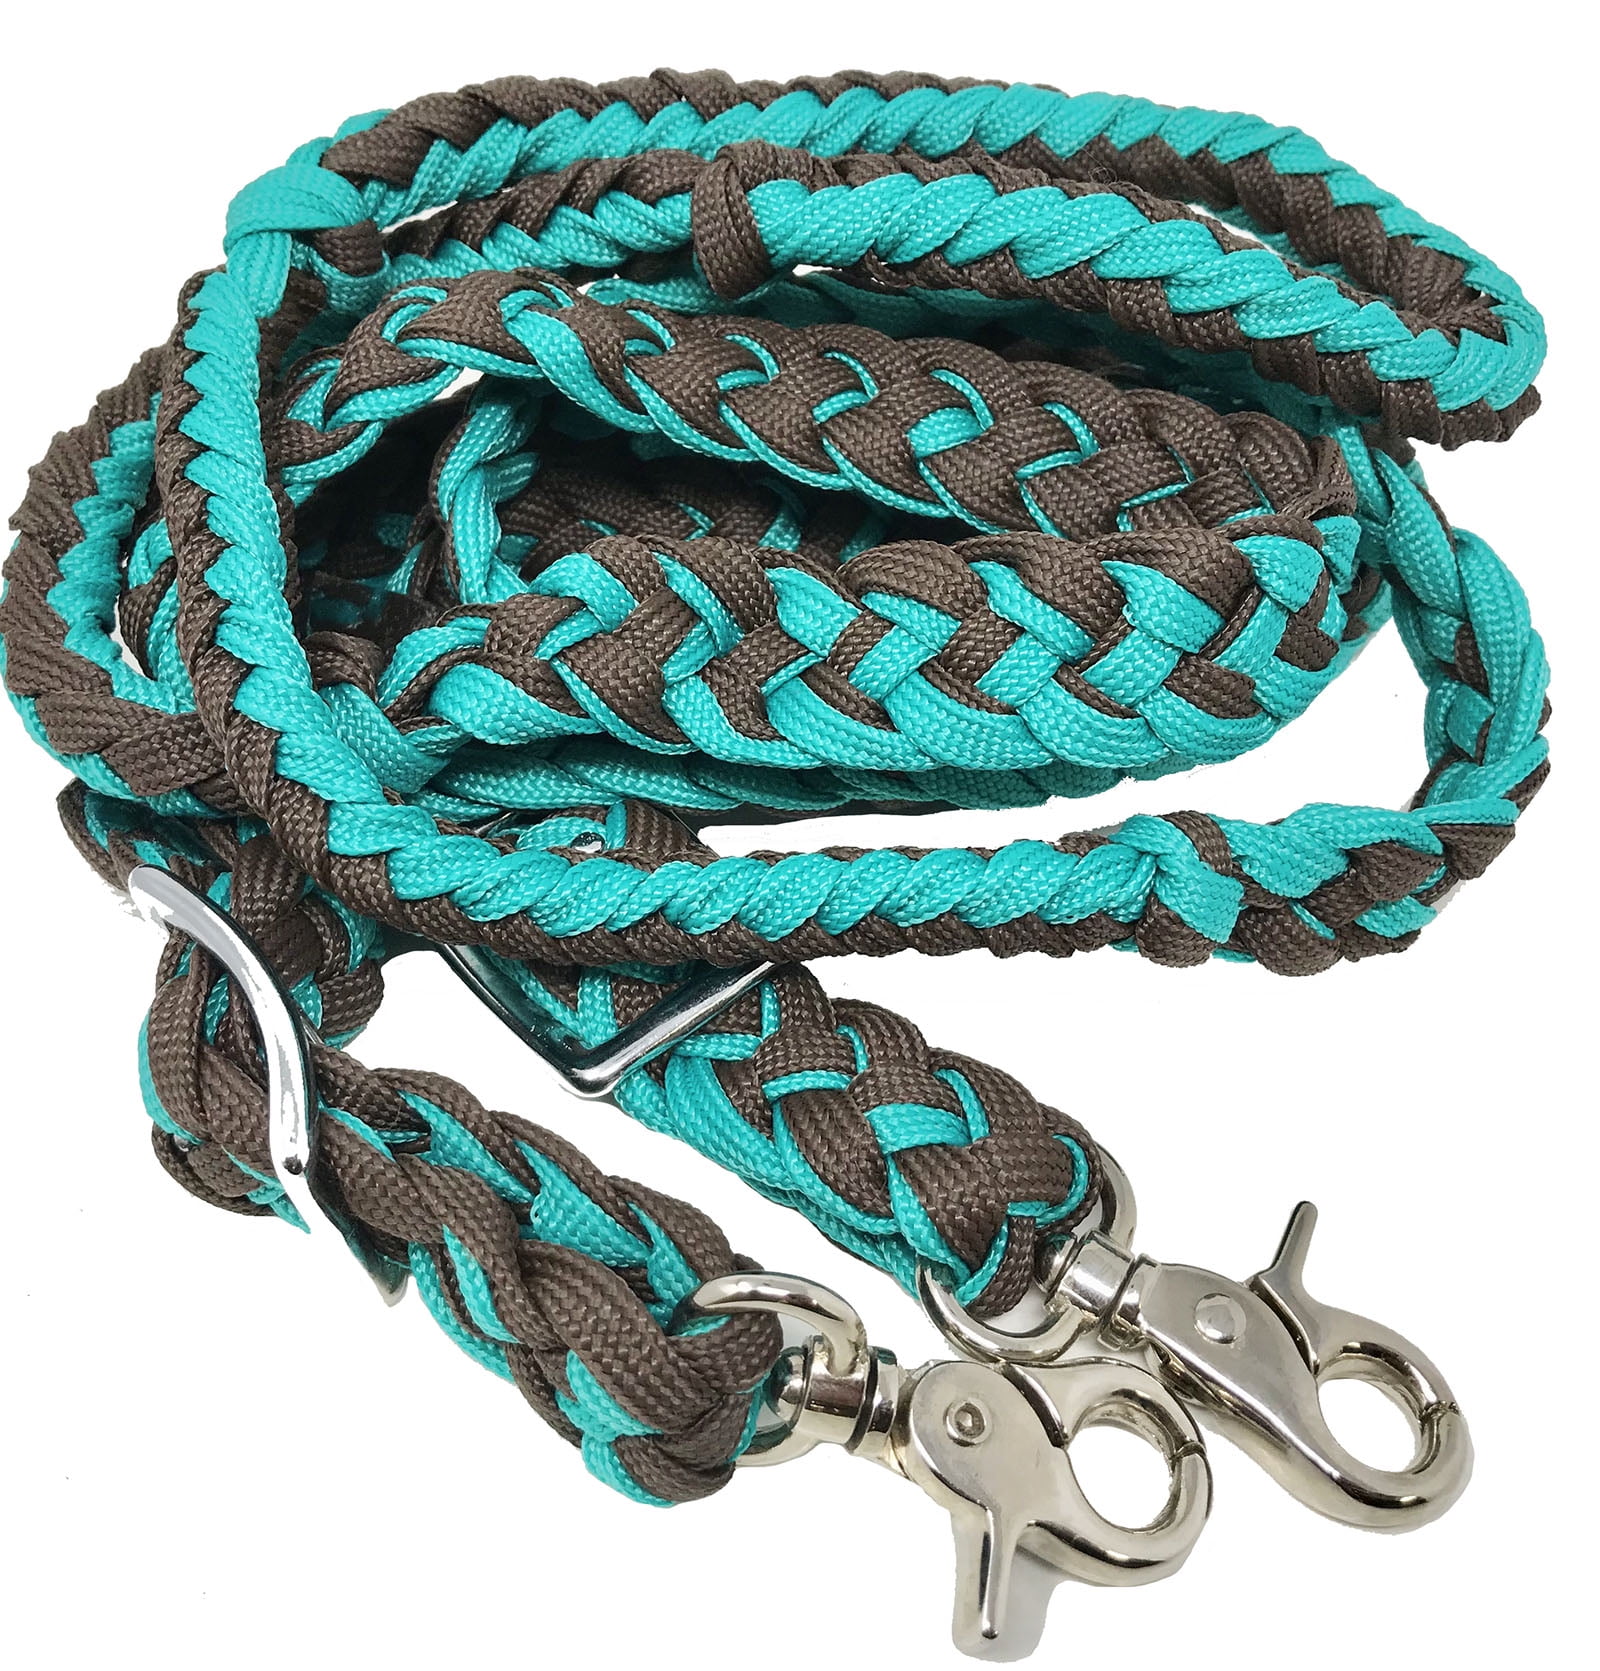 Challenger Western Nylon Braided Roping Knotted Barrel Reins Teal Brown 60764 